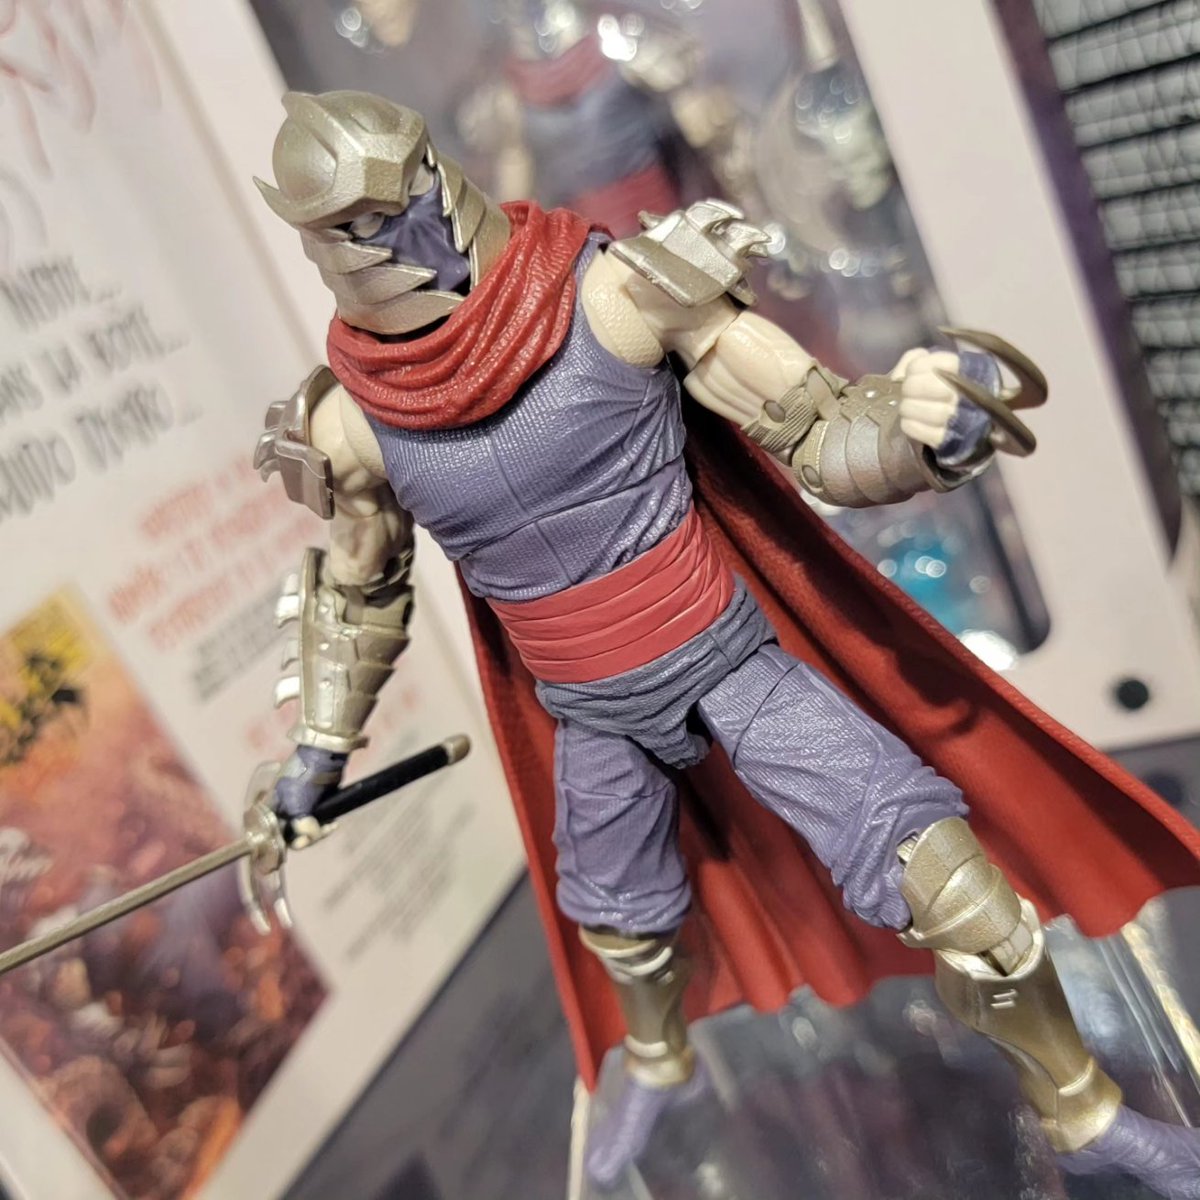 #TMNT Shredder in Hell figure from @LoyalSubjects. Comes packaged with comic book, and has a special deco with sort of a shimmery, goldish look to the armor. 

#ToyFair #nytf #nytoyfair